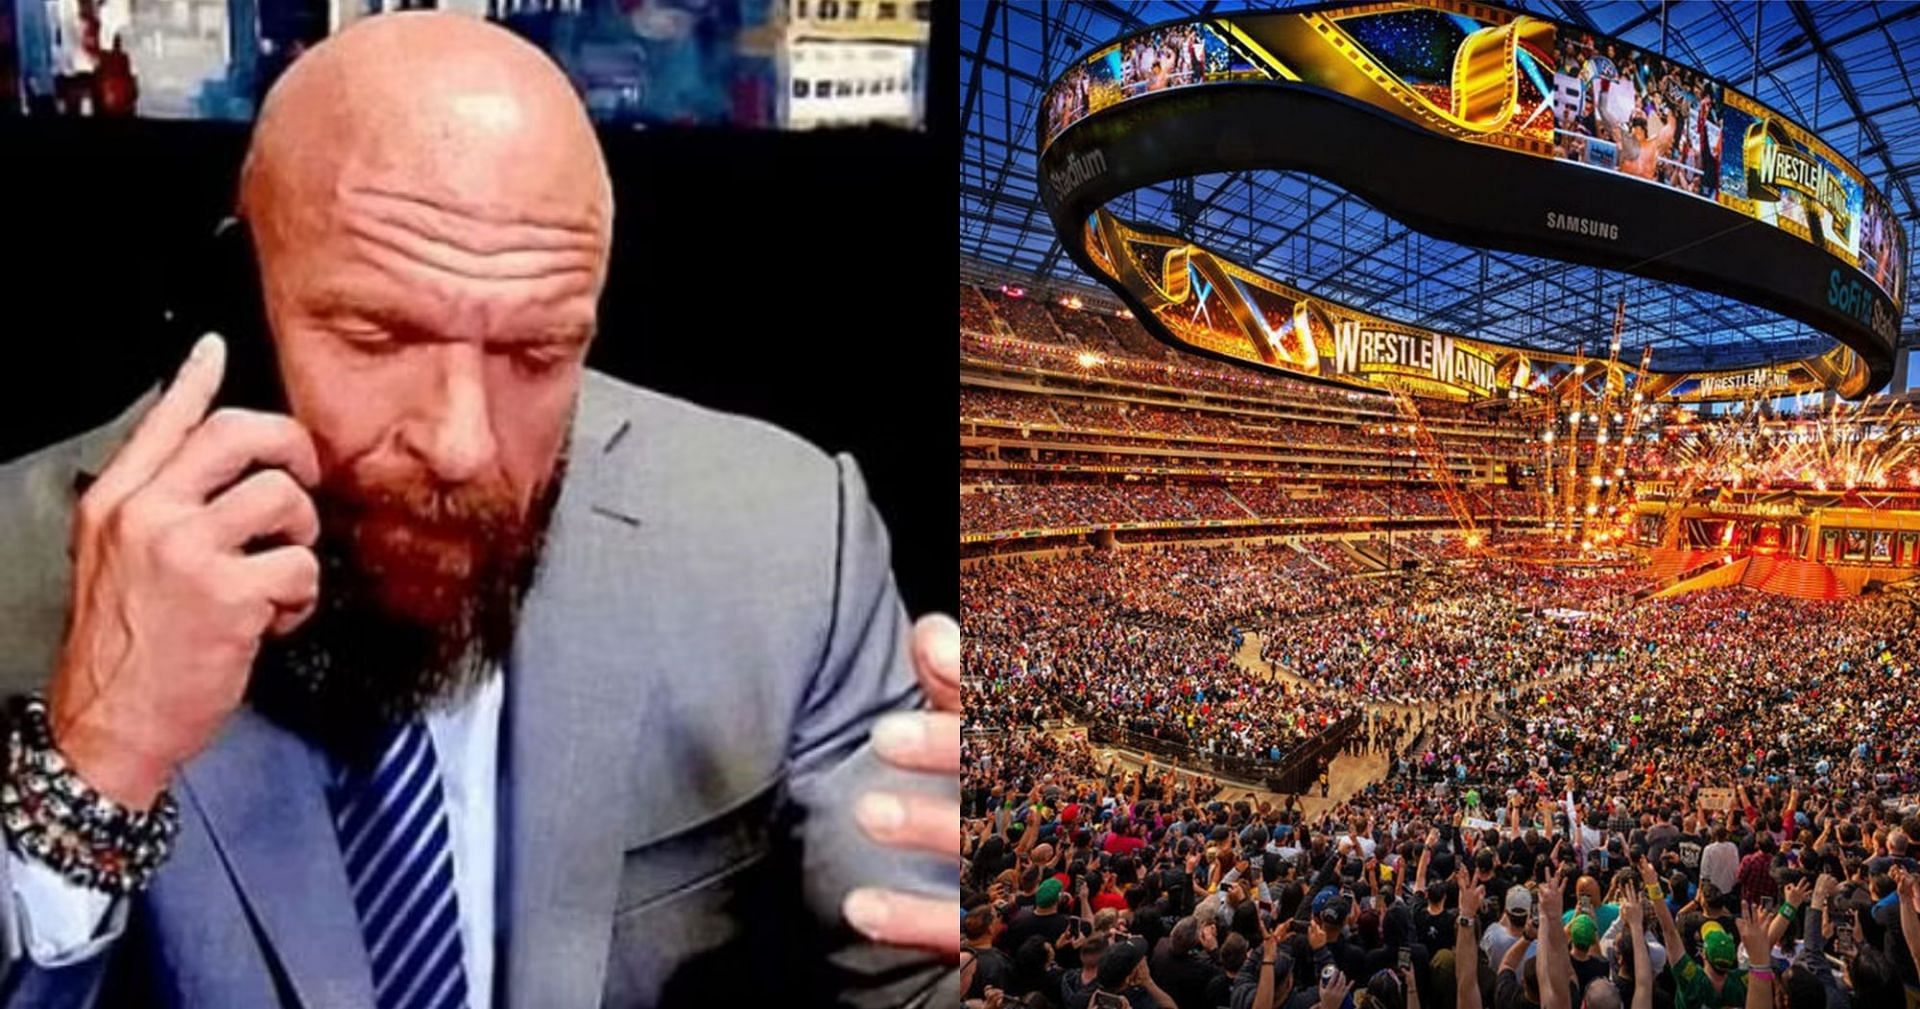 Triple H could be planning a WrestleMania debut given the circumstances